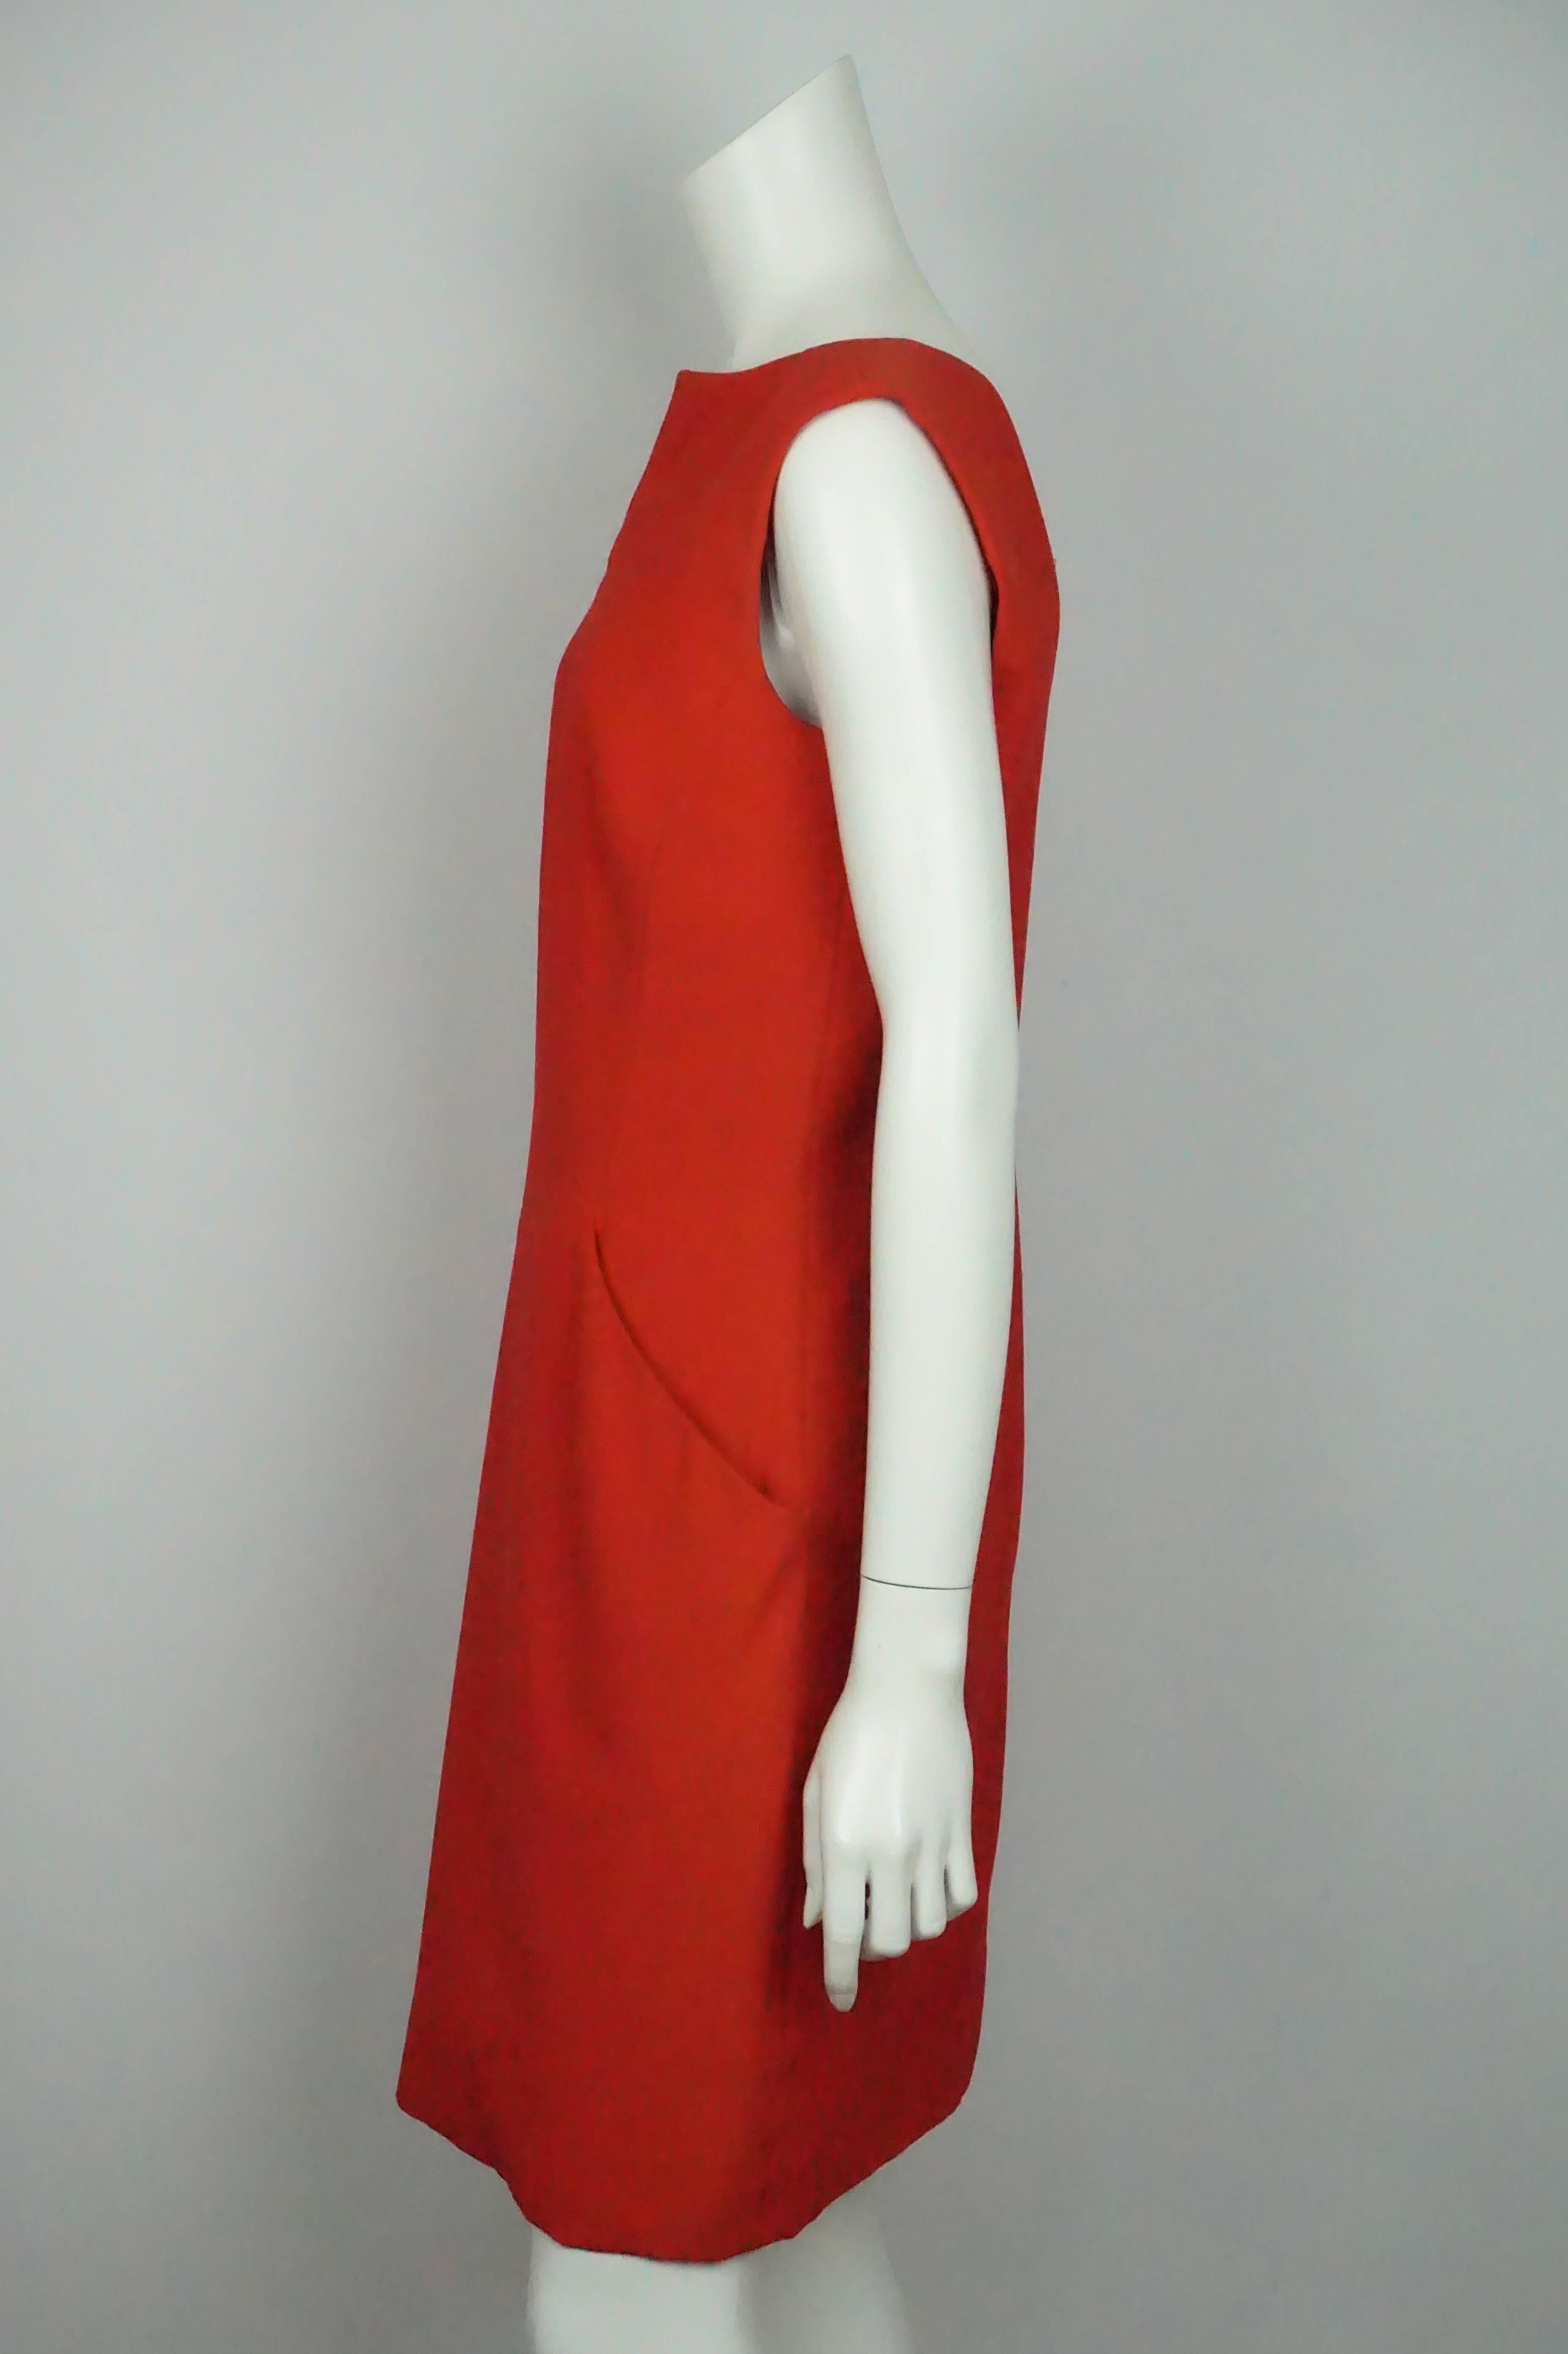 Alexander McQueen Red Sleeveless Sheath Dress - 44  This elegant dress is in good condition. The dress is made of a acetate/rayon material and is silk lined. The dress is sleeveless with a plunging back and a v to the waist. There is a slight slit